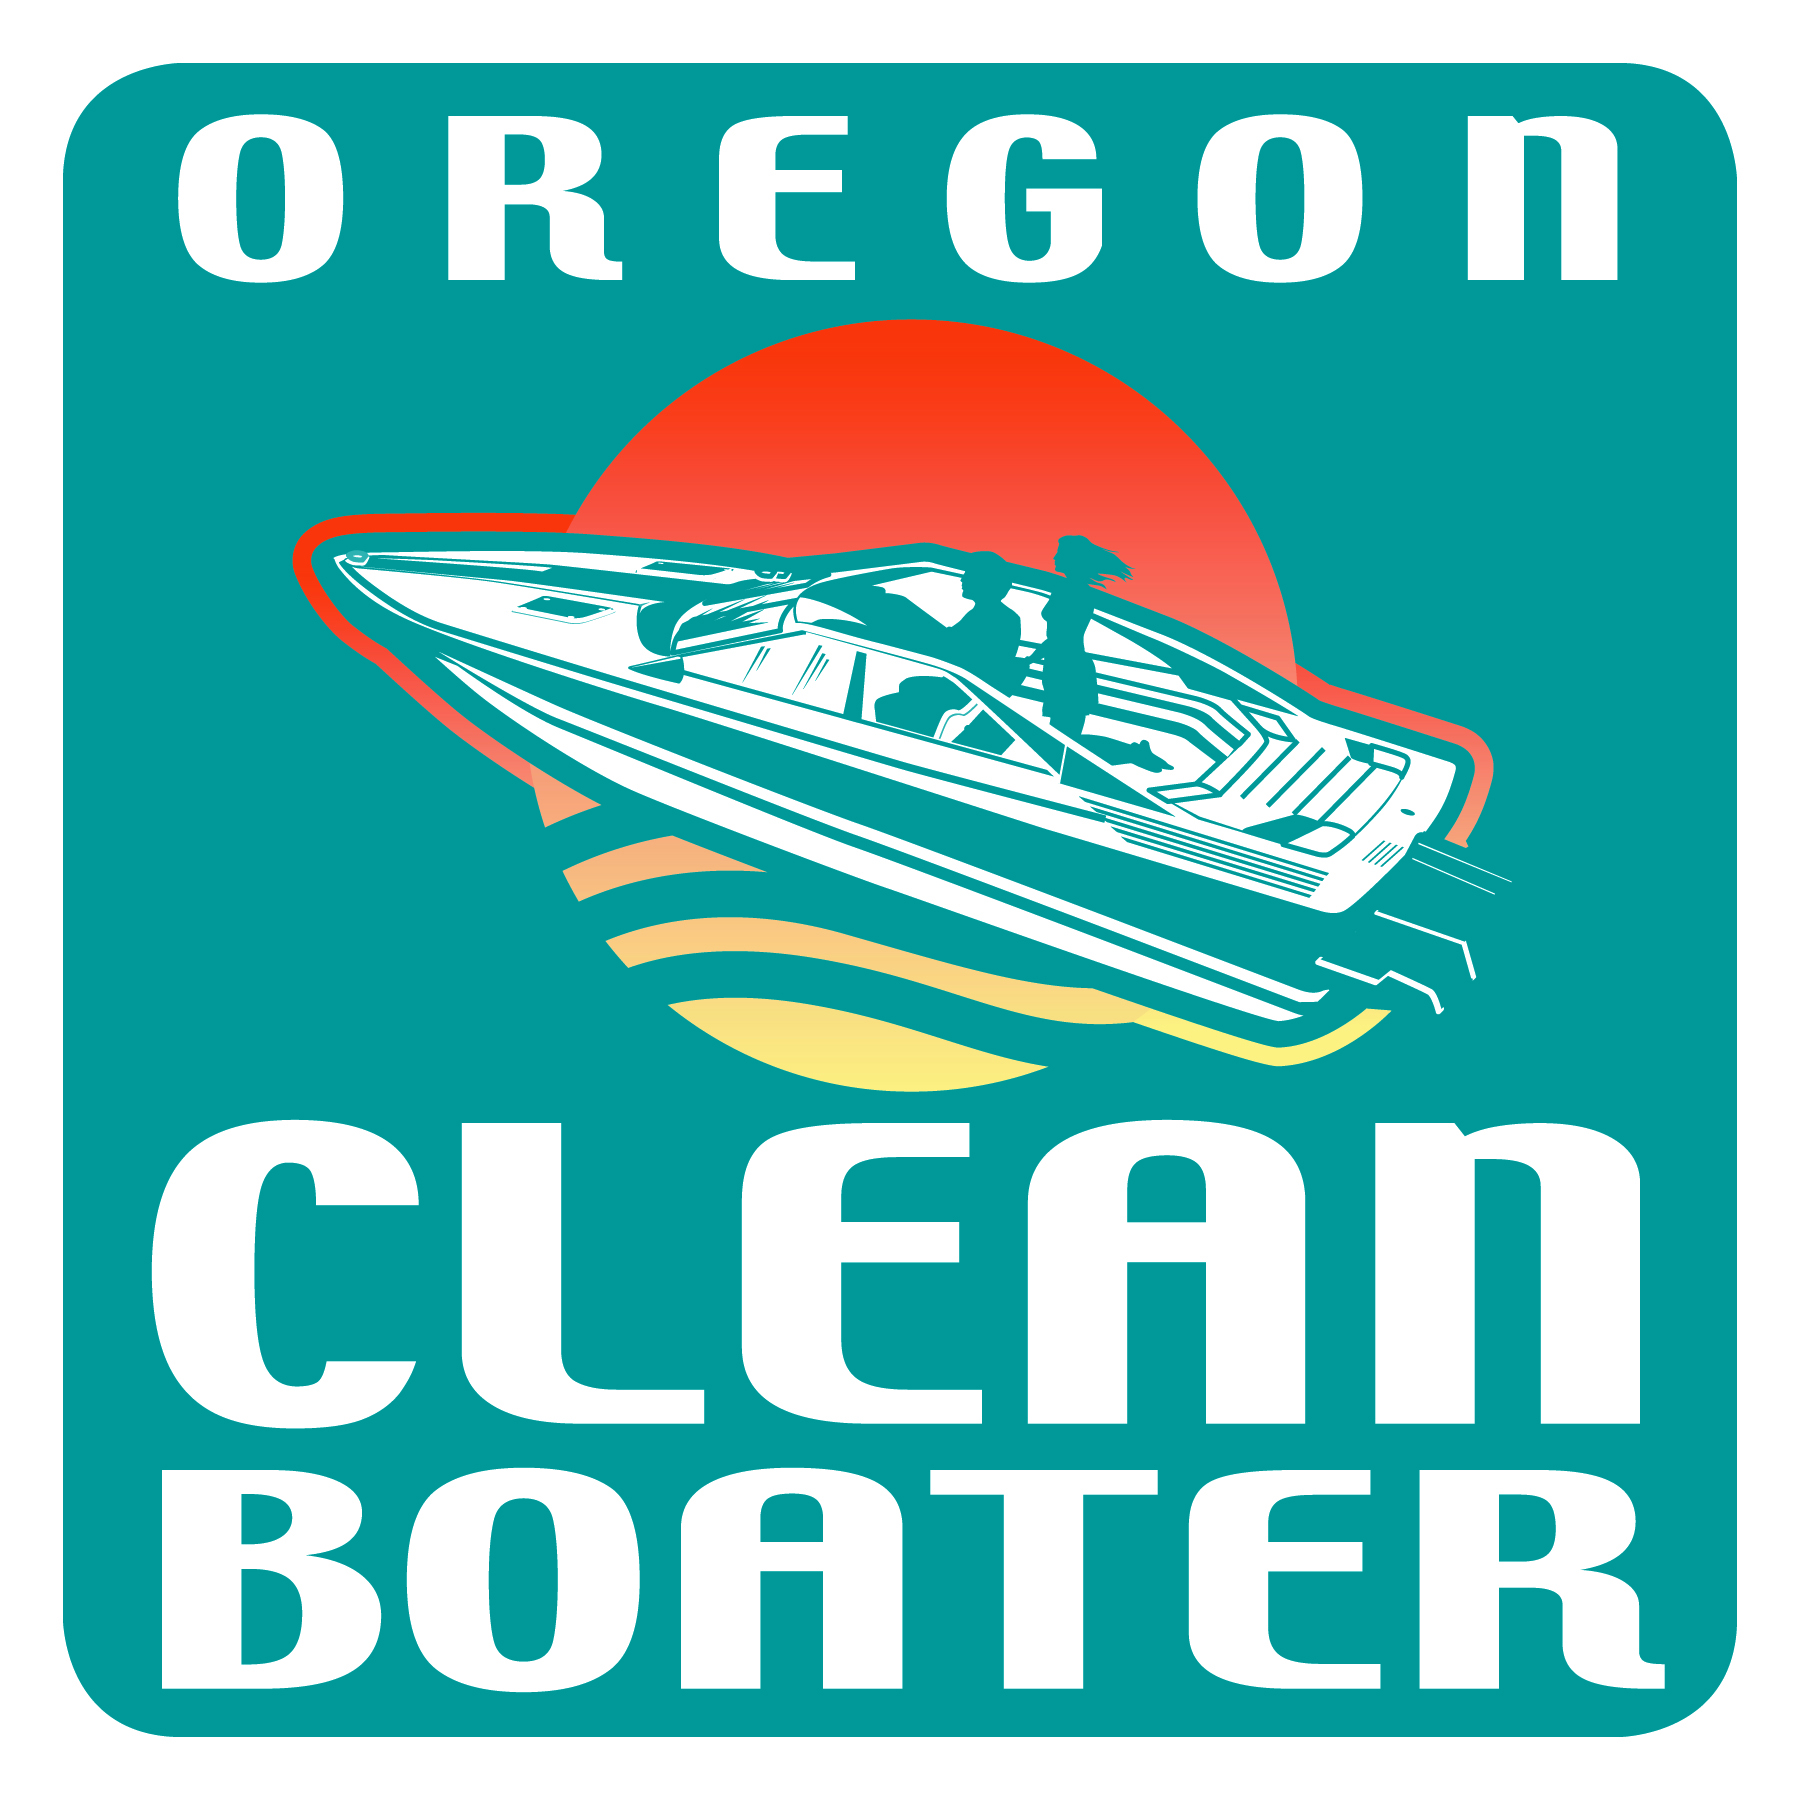 Clean boater logo